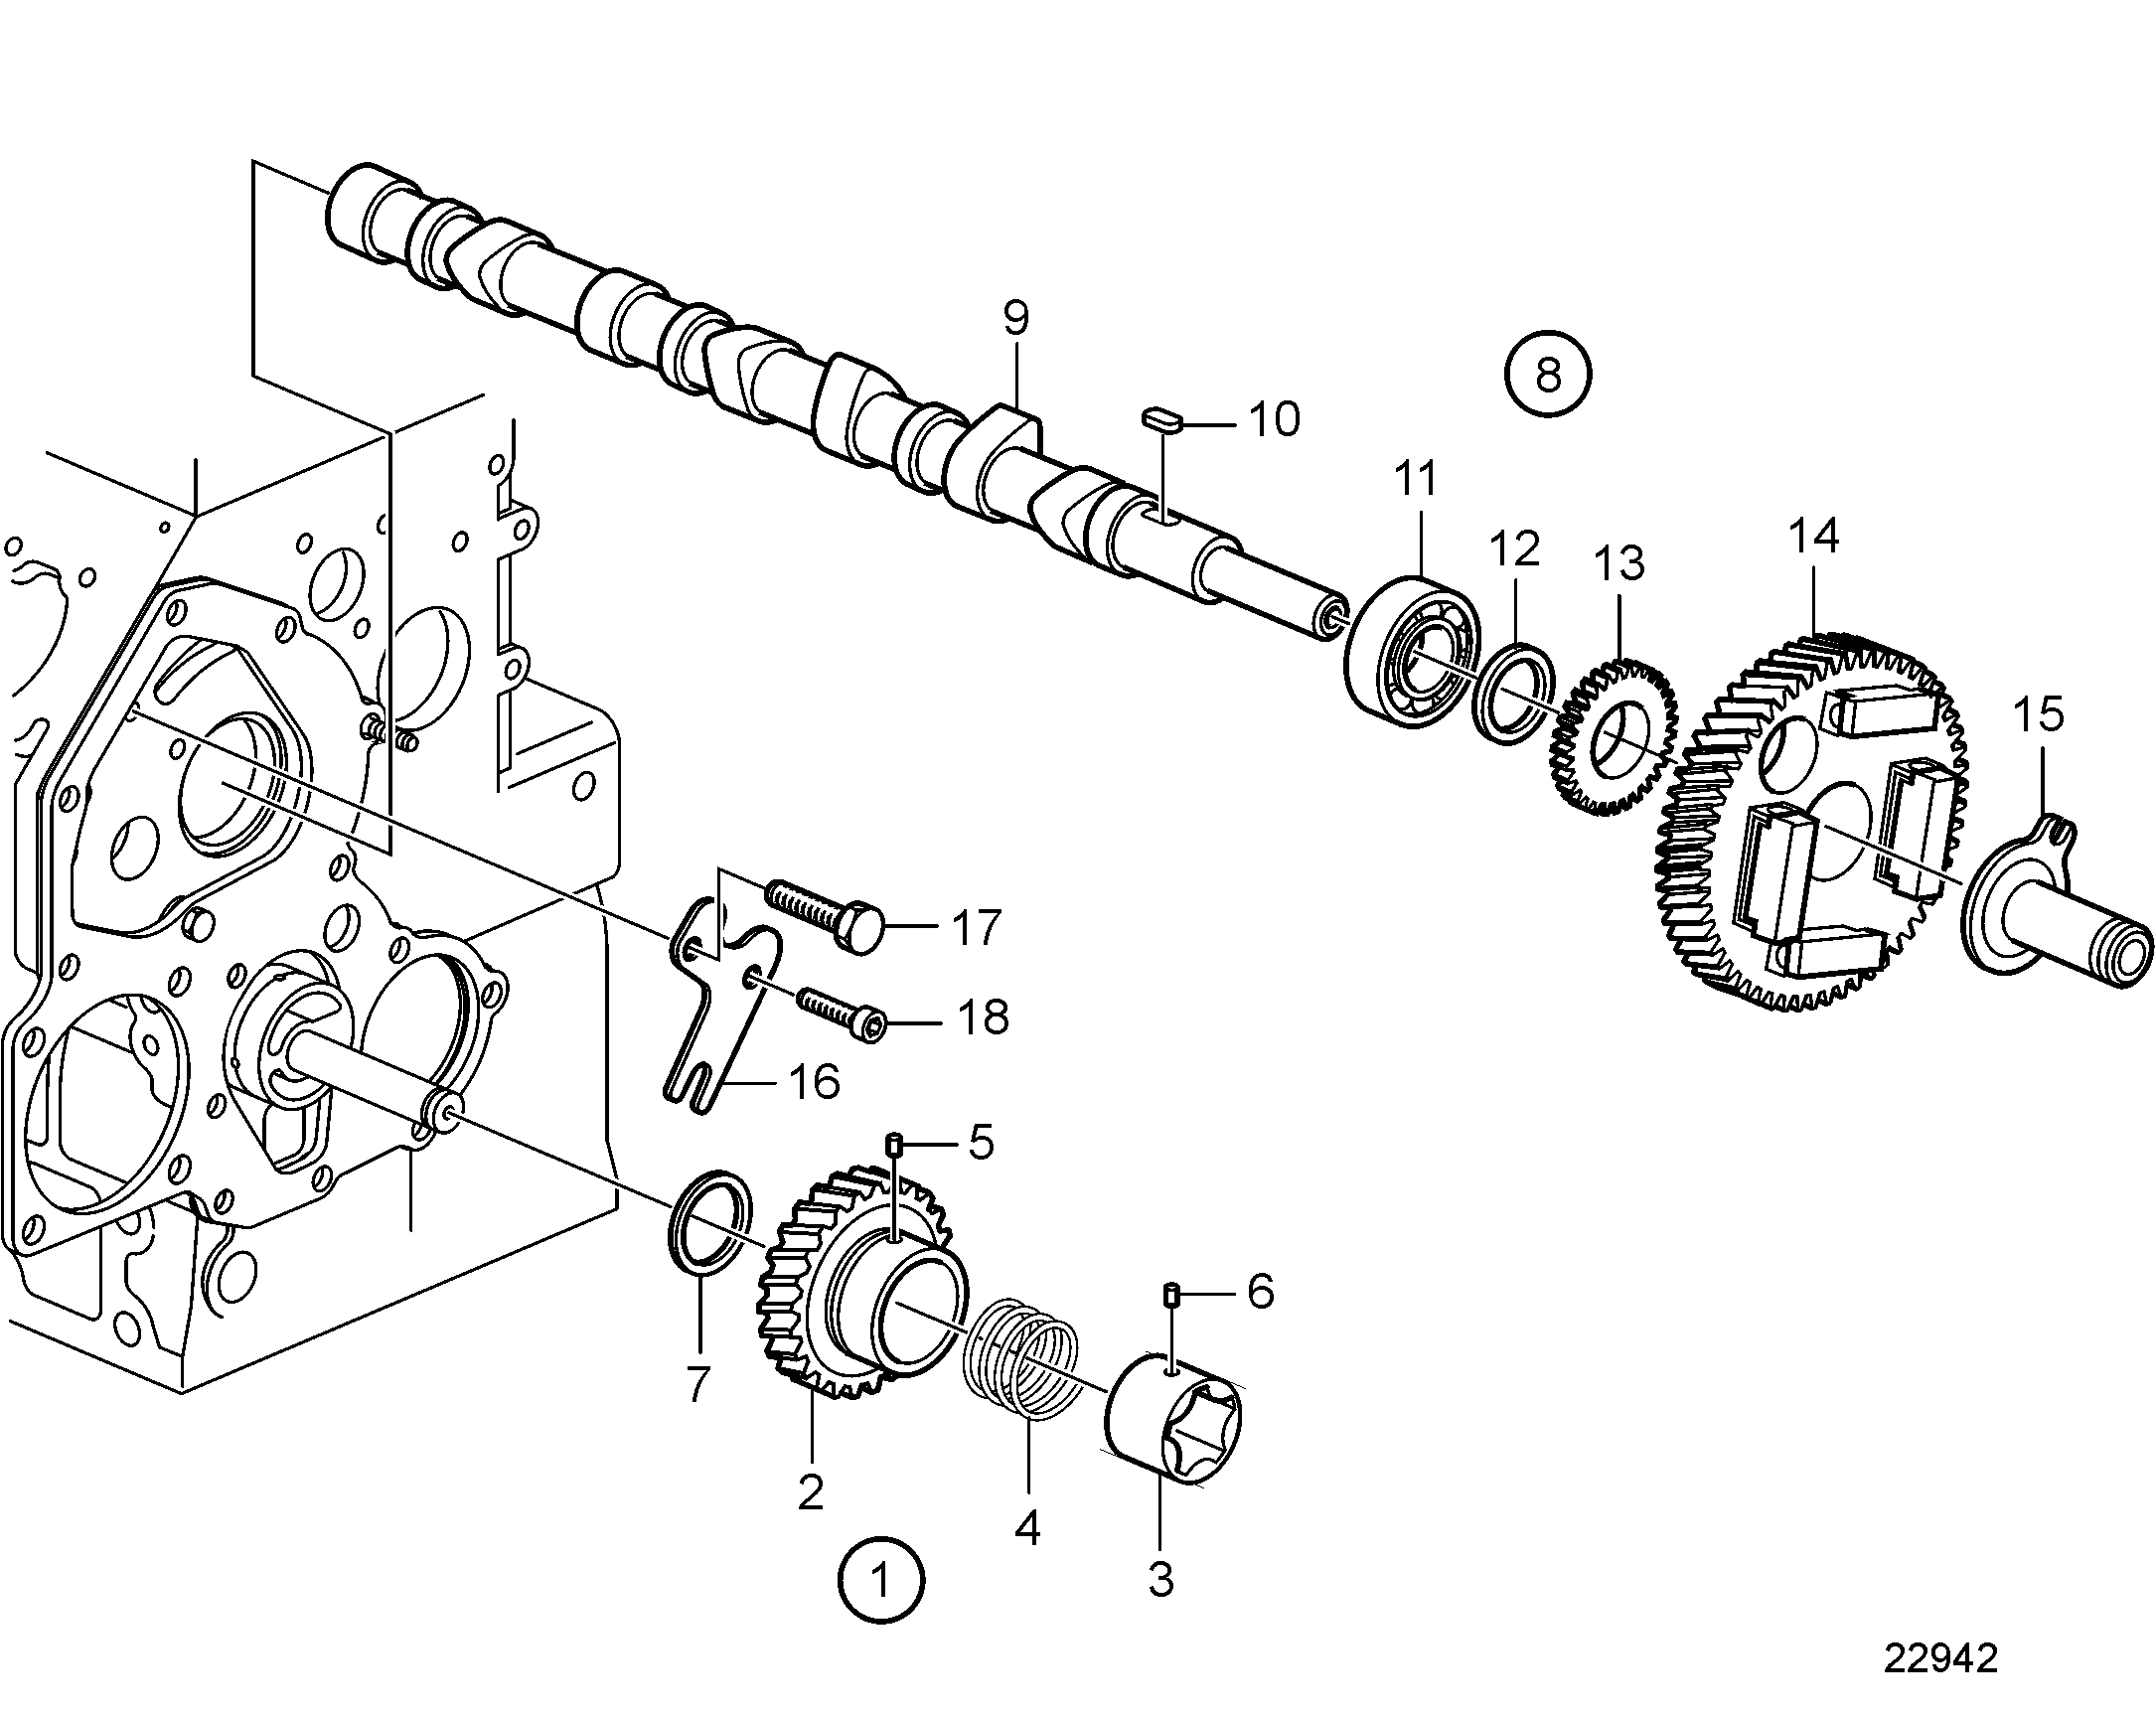 Camshaft and gears